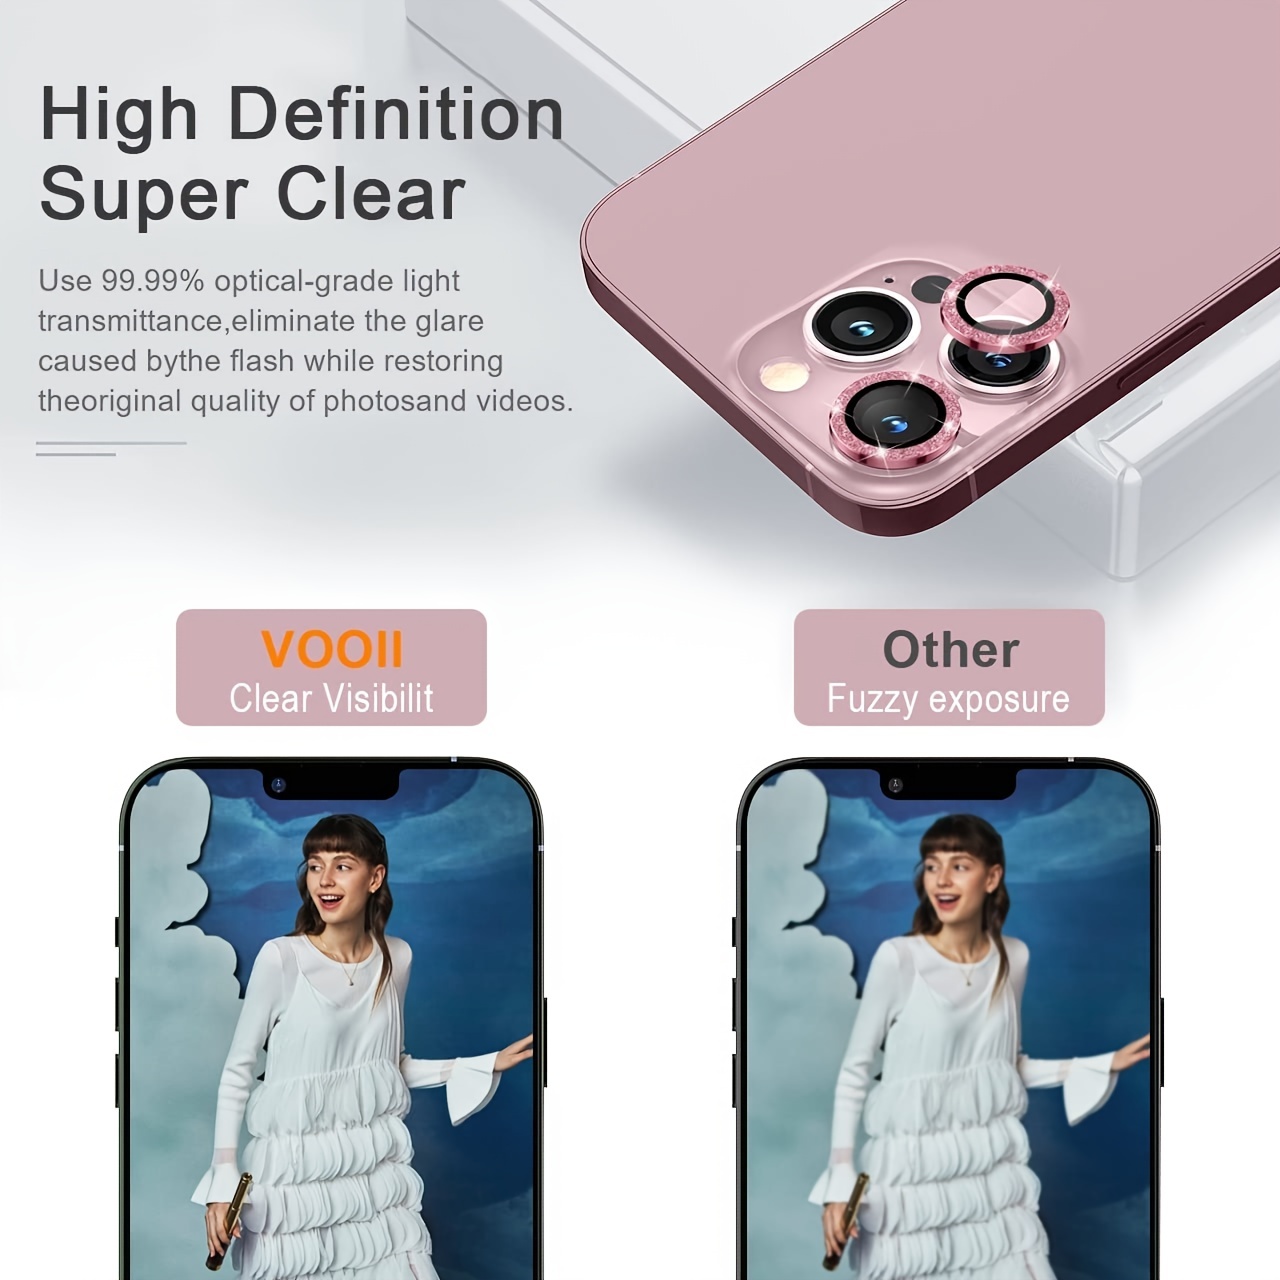 for iPhone 13 Pro Max/iPhone 13 Pro Camera Lens Protector, HD Tempered Glass Camera Cover for Women Girls Bling Glitter Sparkle, Camera Lens